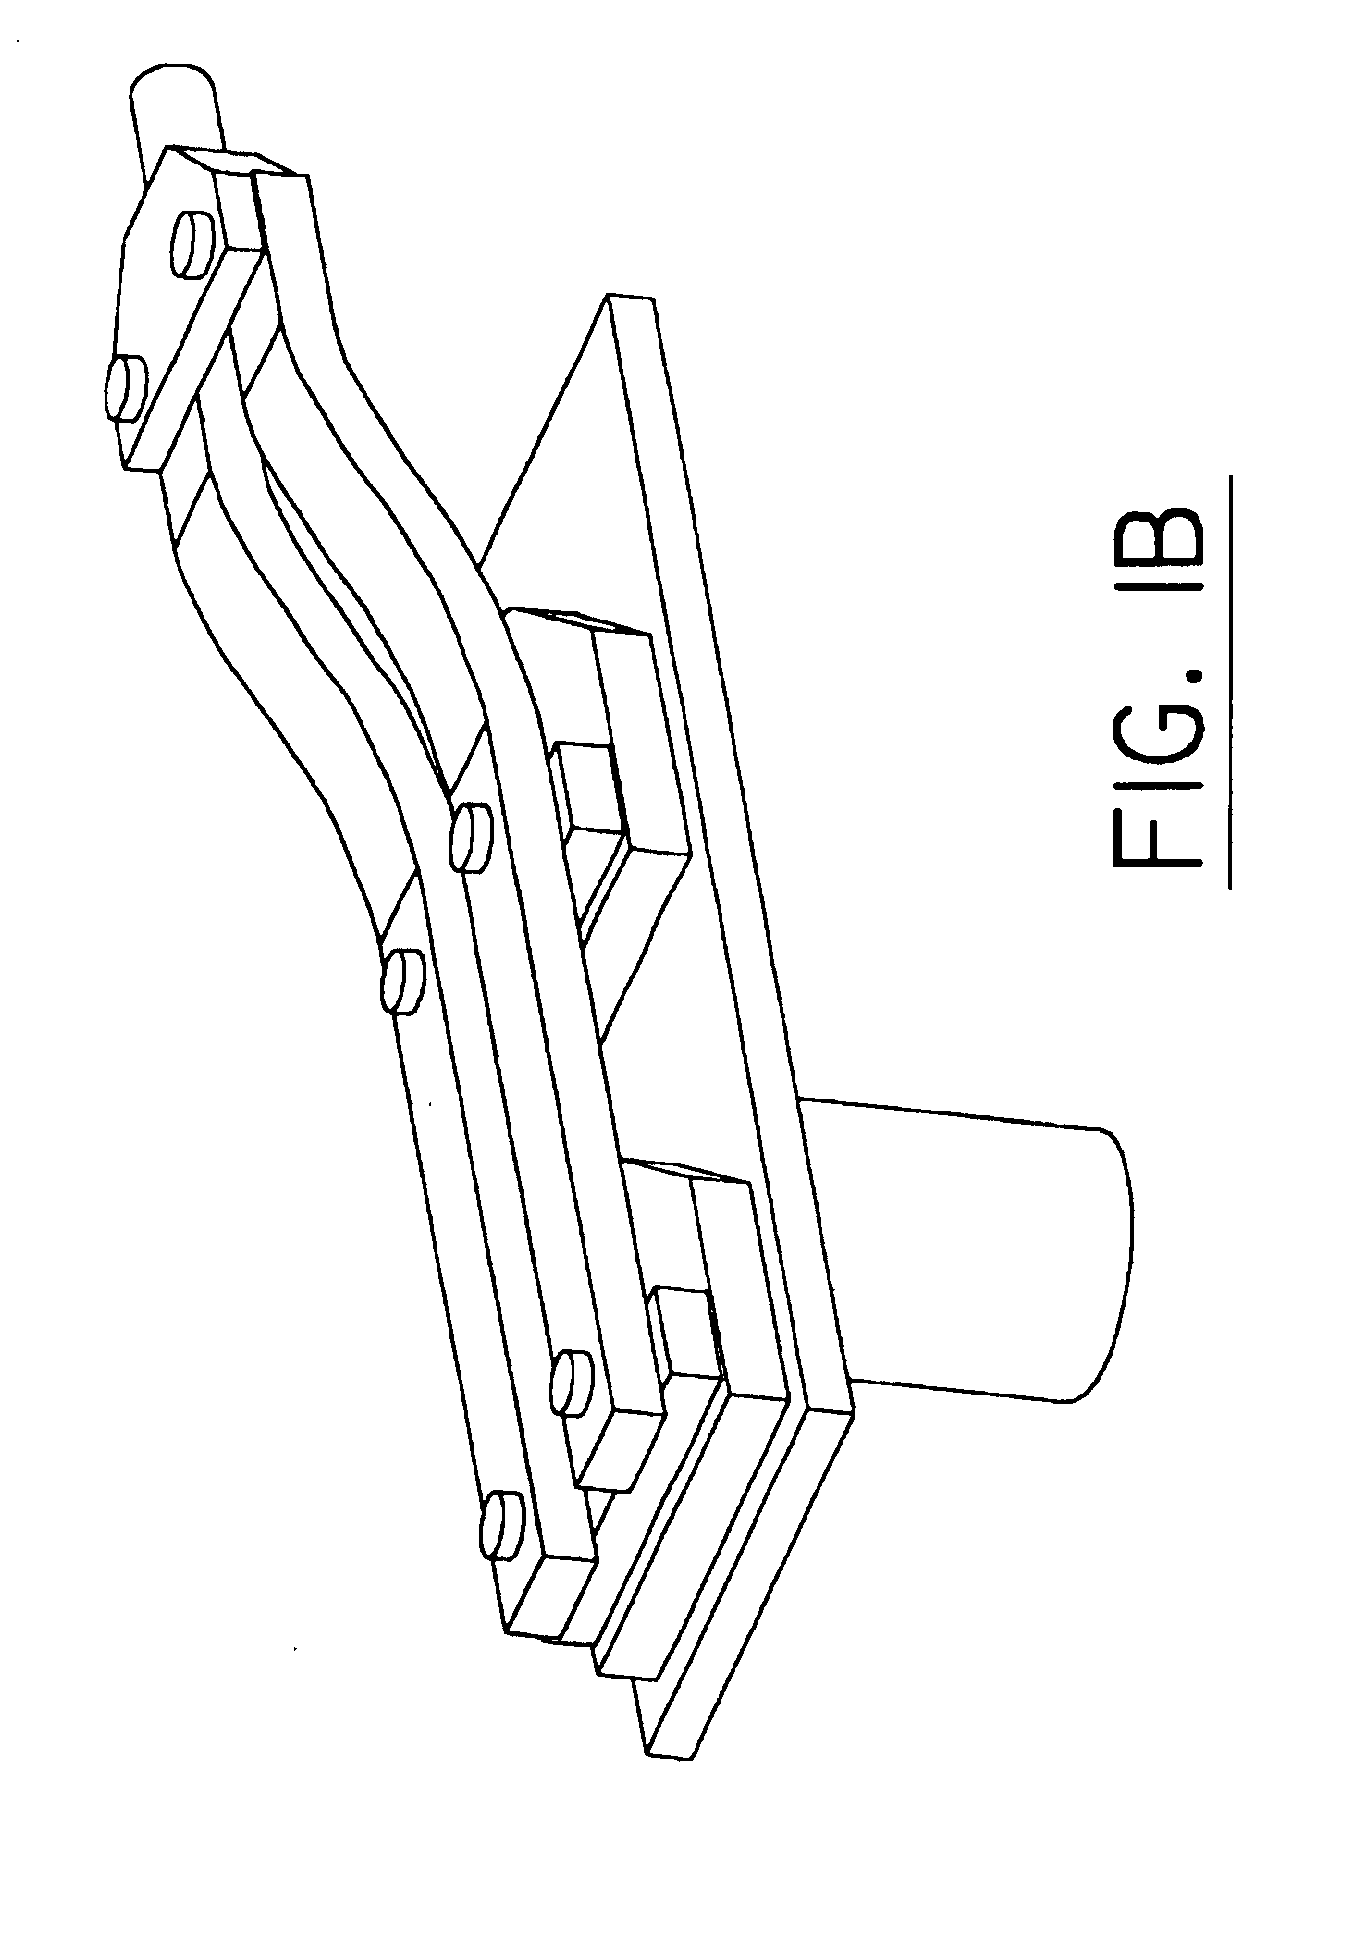 Ophthalmological ultrasonography scanning apparatus